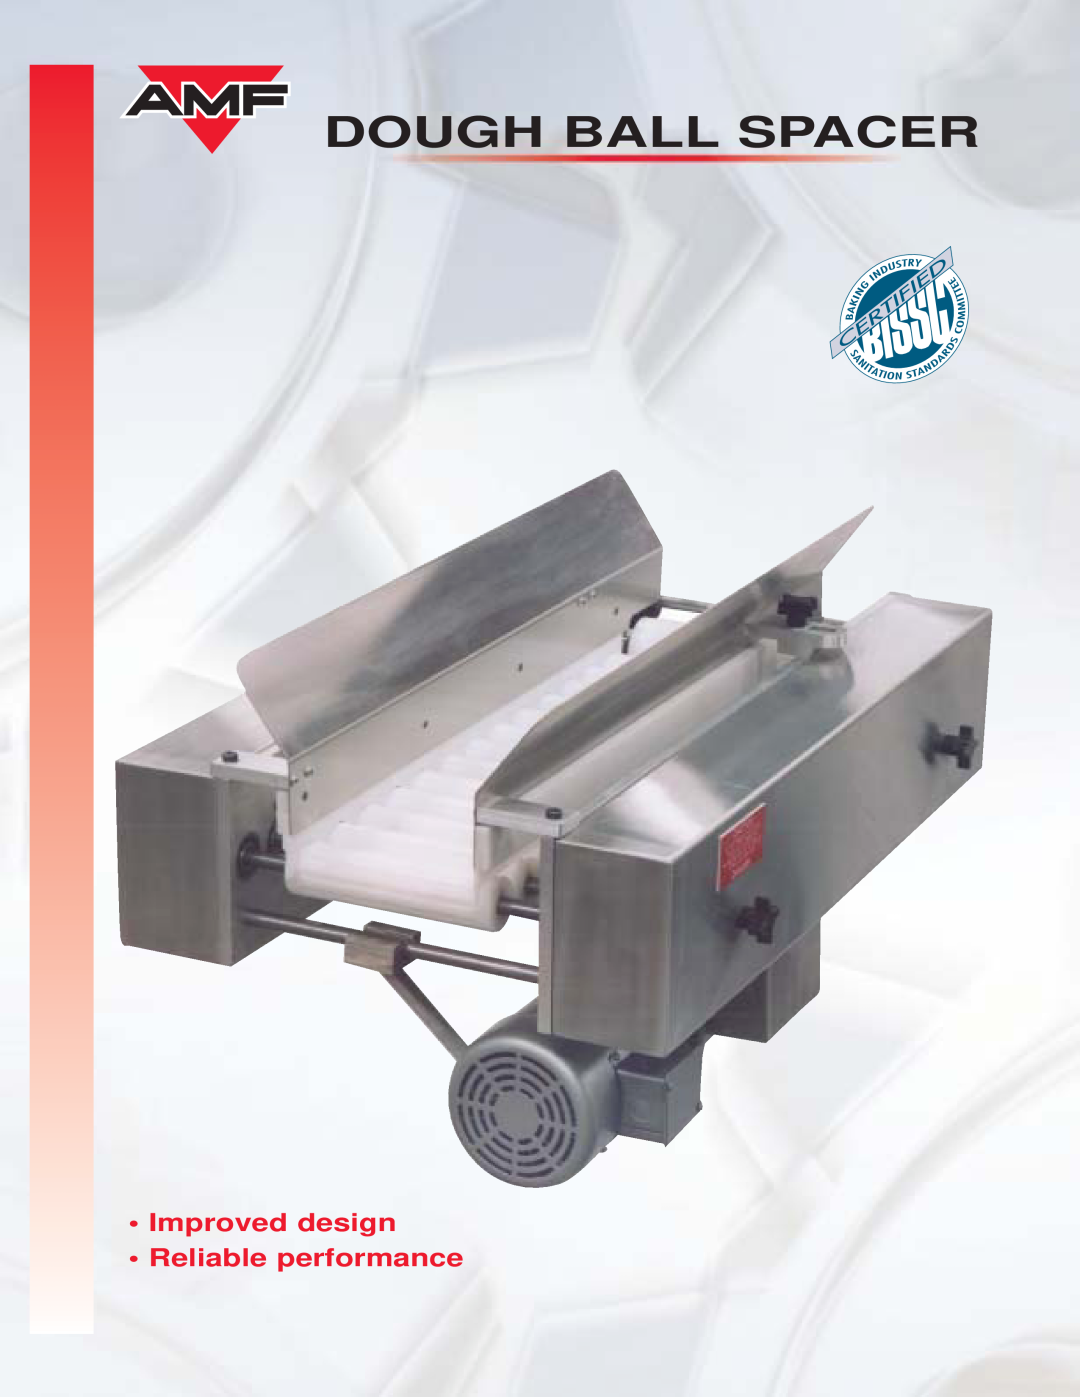 AMF Dough Ball Spacer manual Improved design Reliable performance 